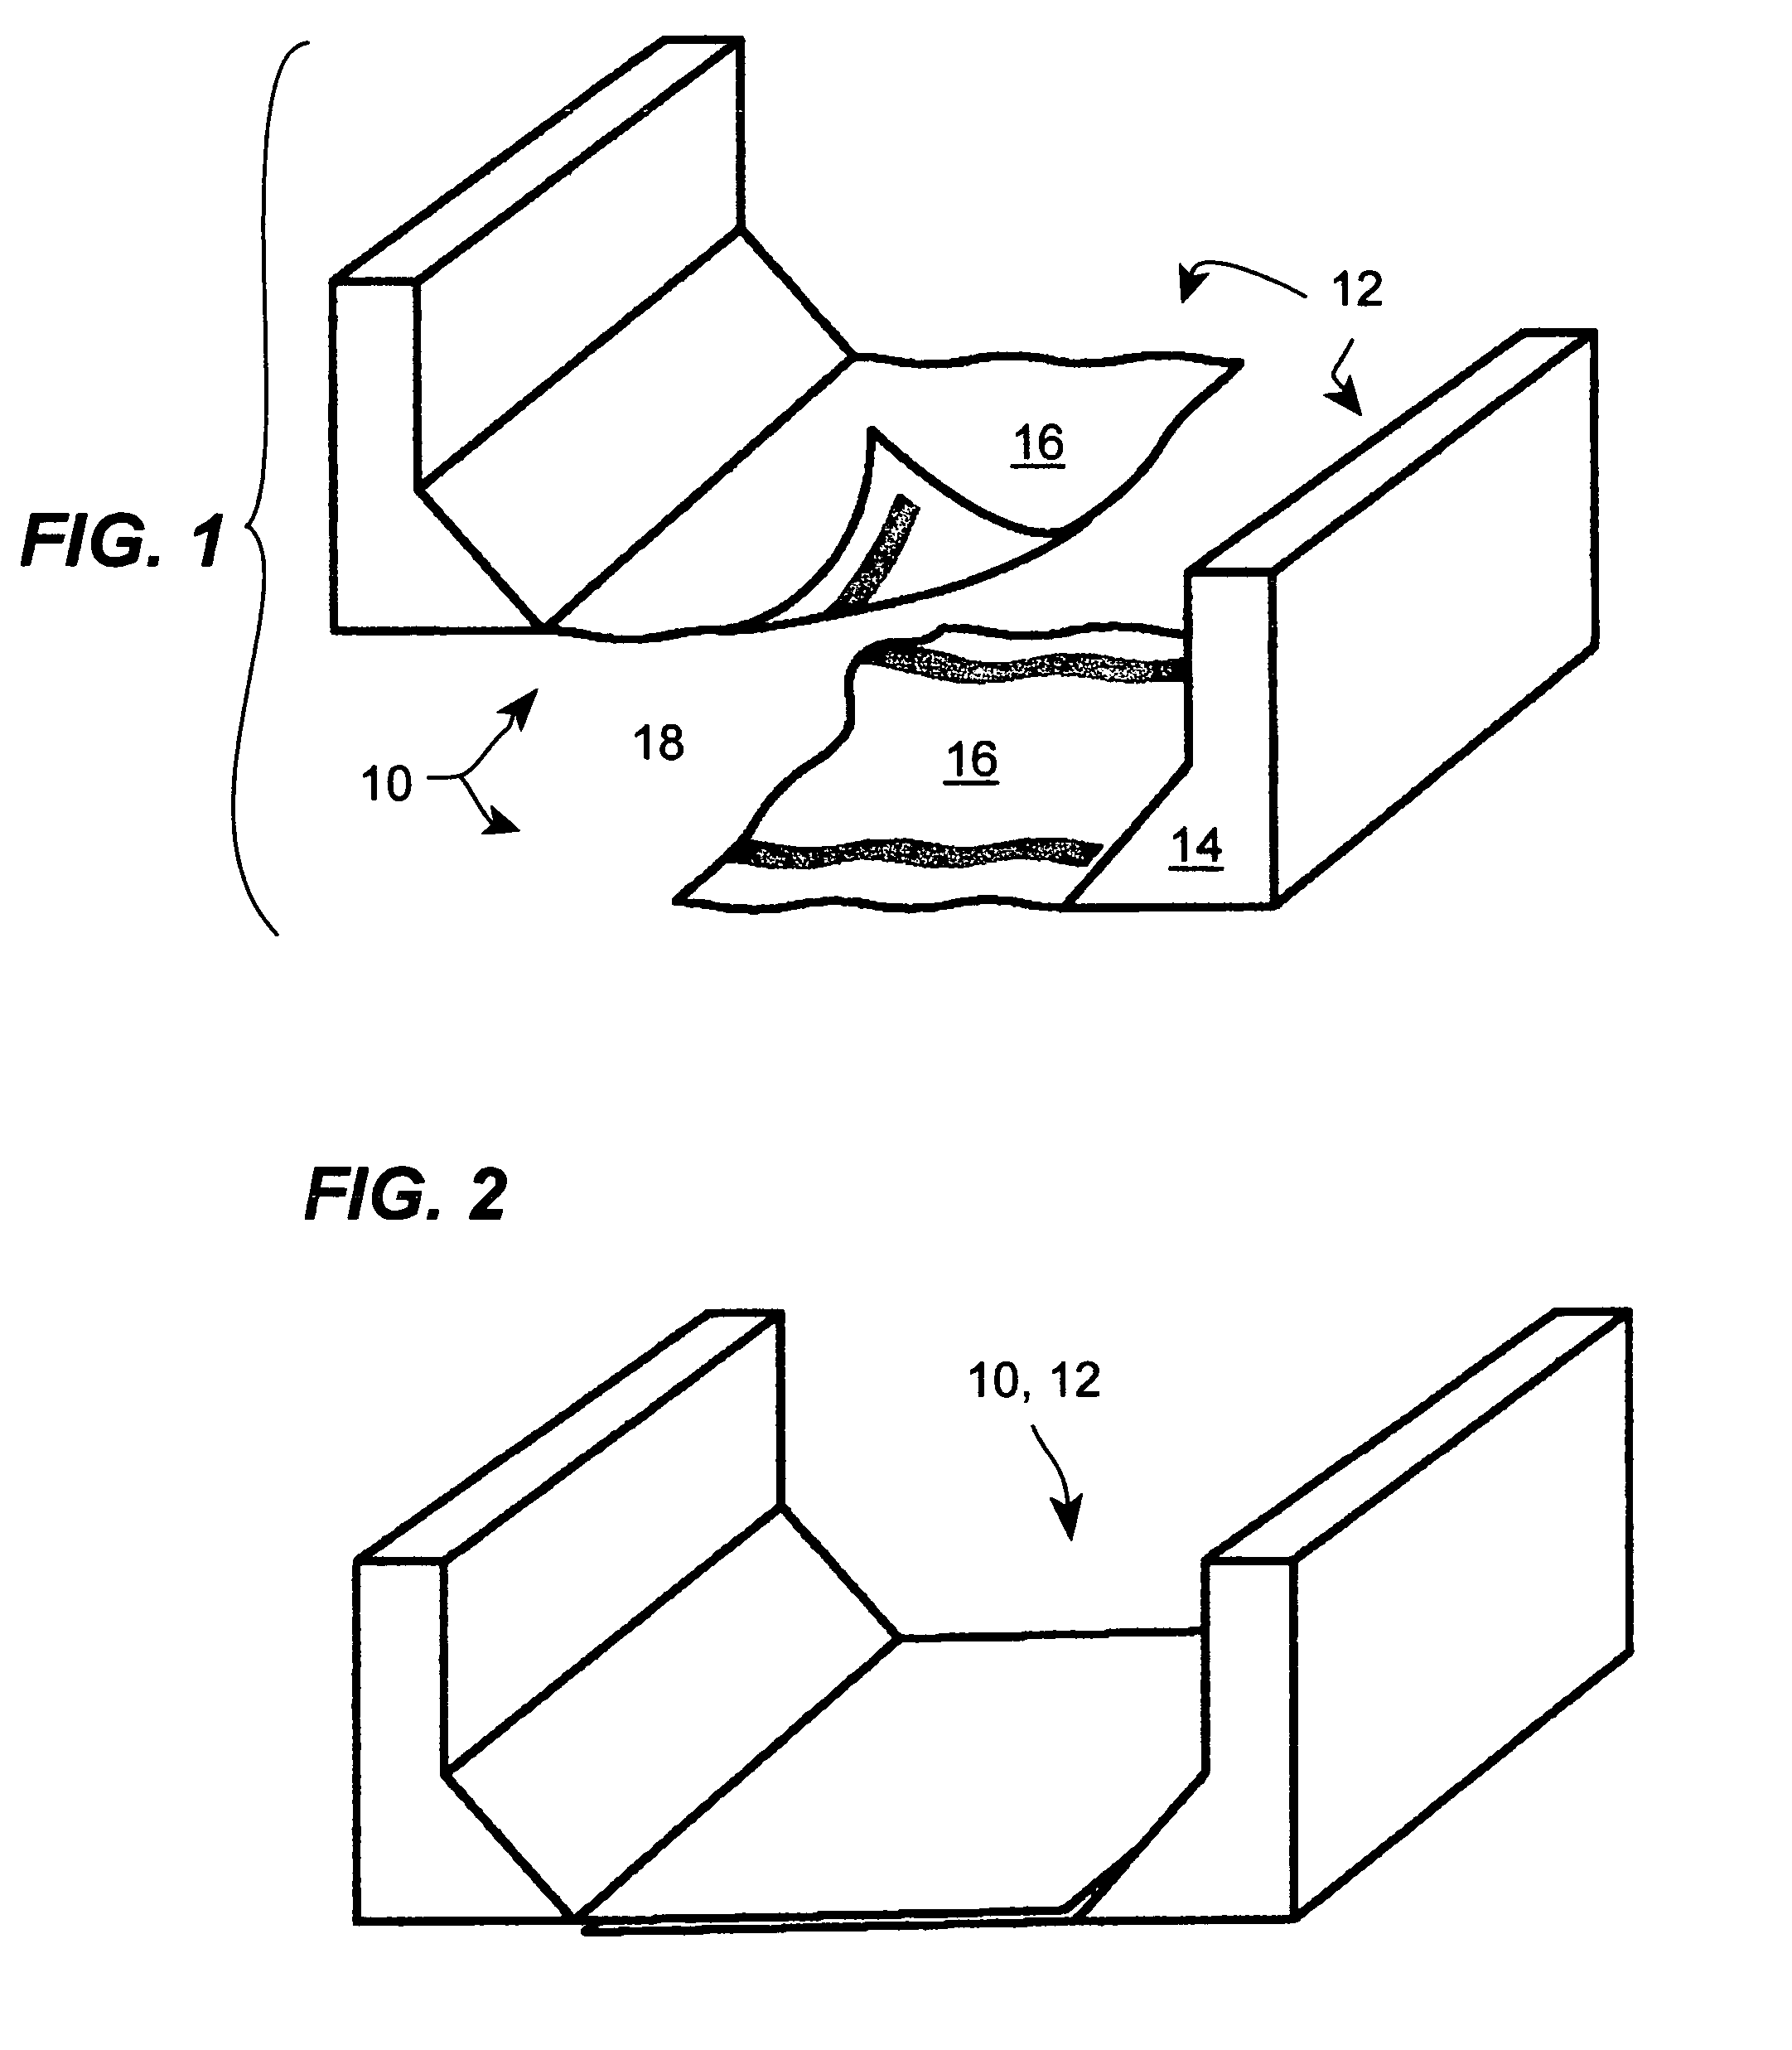 Lateral confinement device for use in children's bed